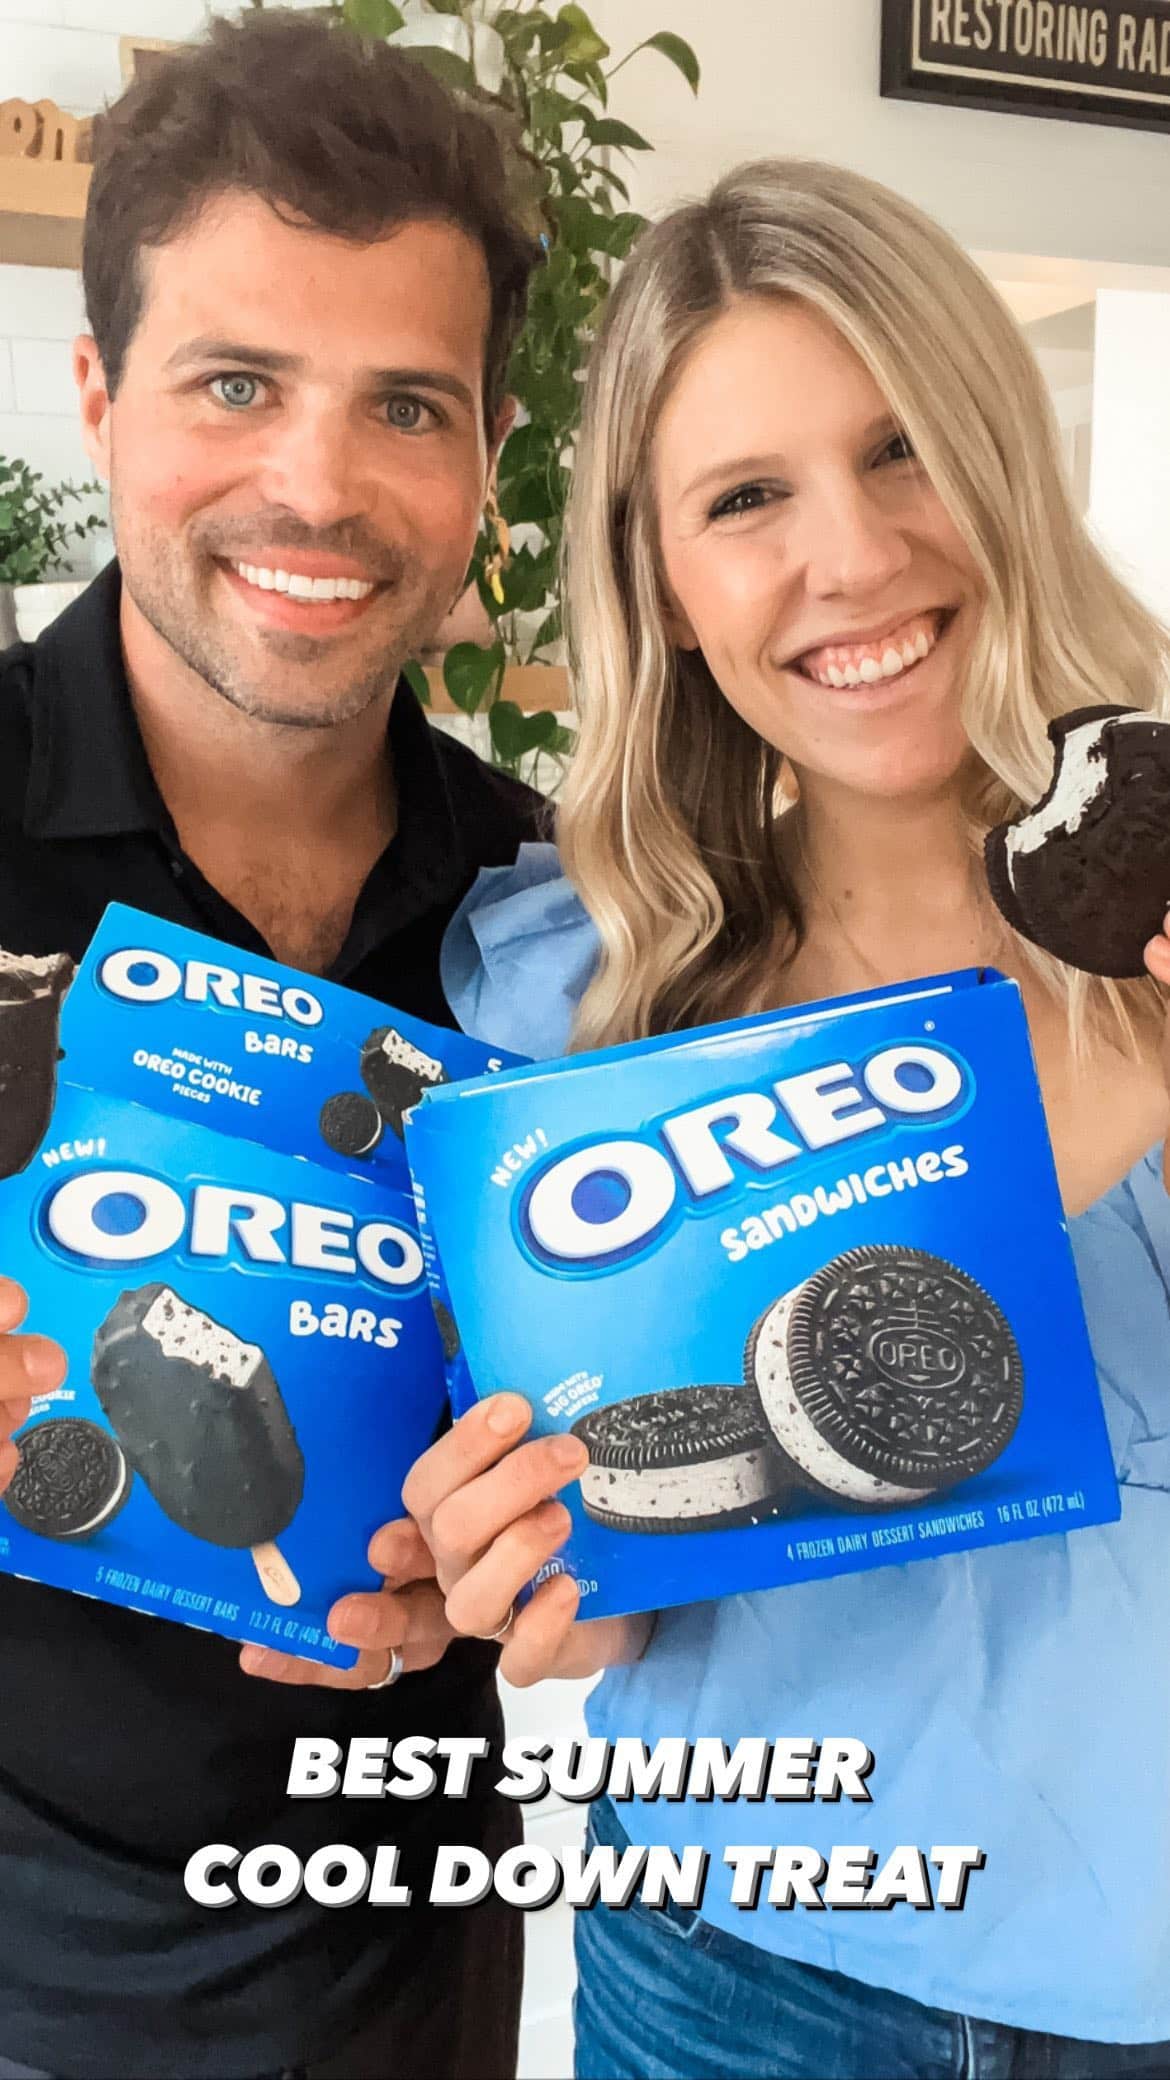 #ad BEST SUMMER TREAT🍦the new @oreo frozen treats! And they come in different forms: tubs, snackable bars, cones & sandwiches💯
.
we are obsessed with these easy treats! no baking or cooking required 💁🏼‍♀️‍️ i’m team sandwich & thomas is team bar! which team are you?!

#TheRealOneIsHere #OreoFrozenTreats

​​OREO is a trademark of Mondelēz International group, used under license.